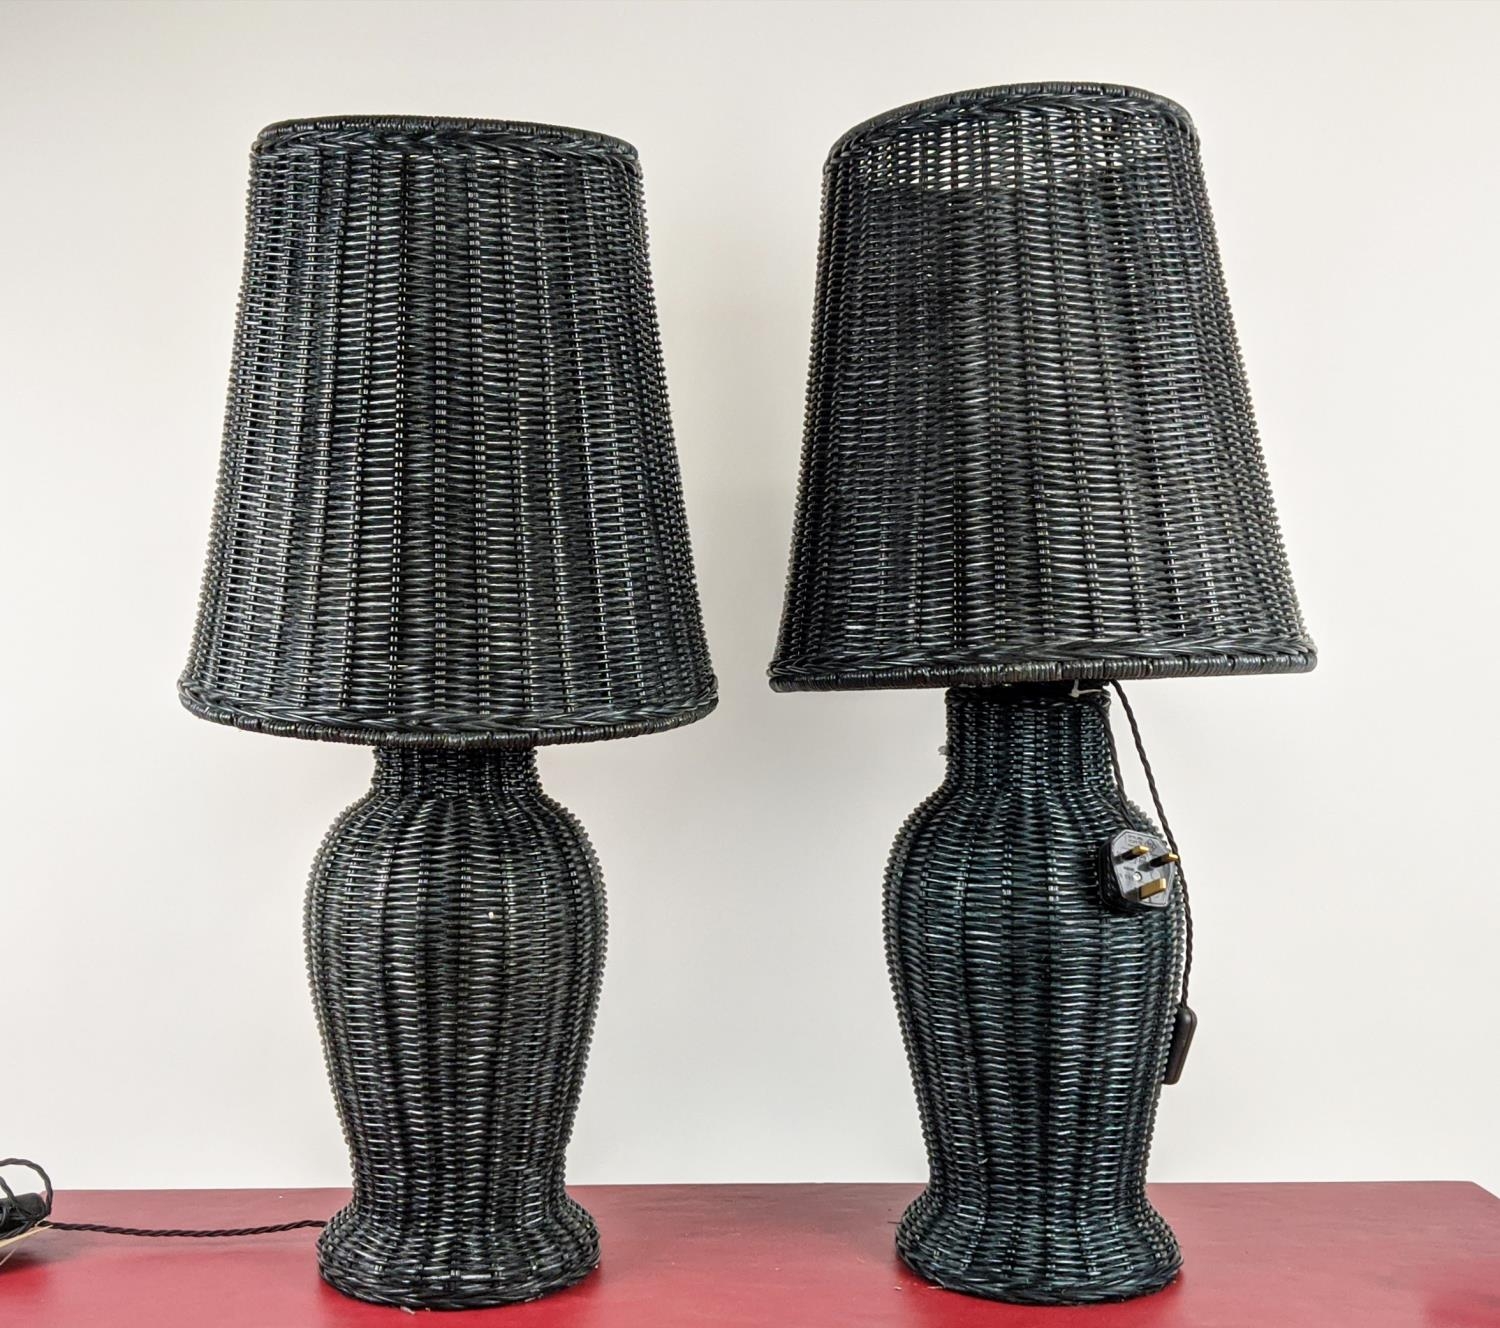 PAOLO MOSCHINO NOVA TABLE LAMPS, a pair, with shades, 82cm H. (2) - Image 2 of 14